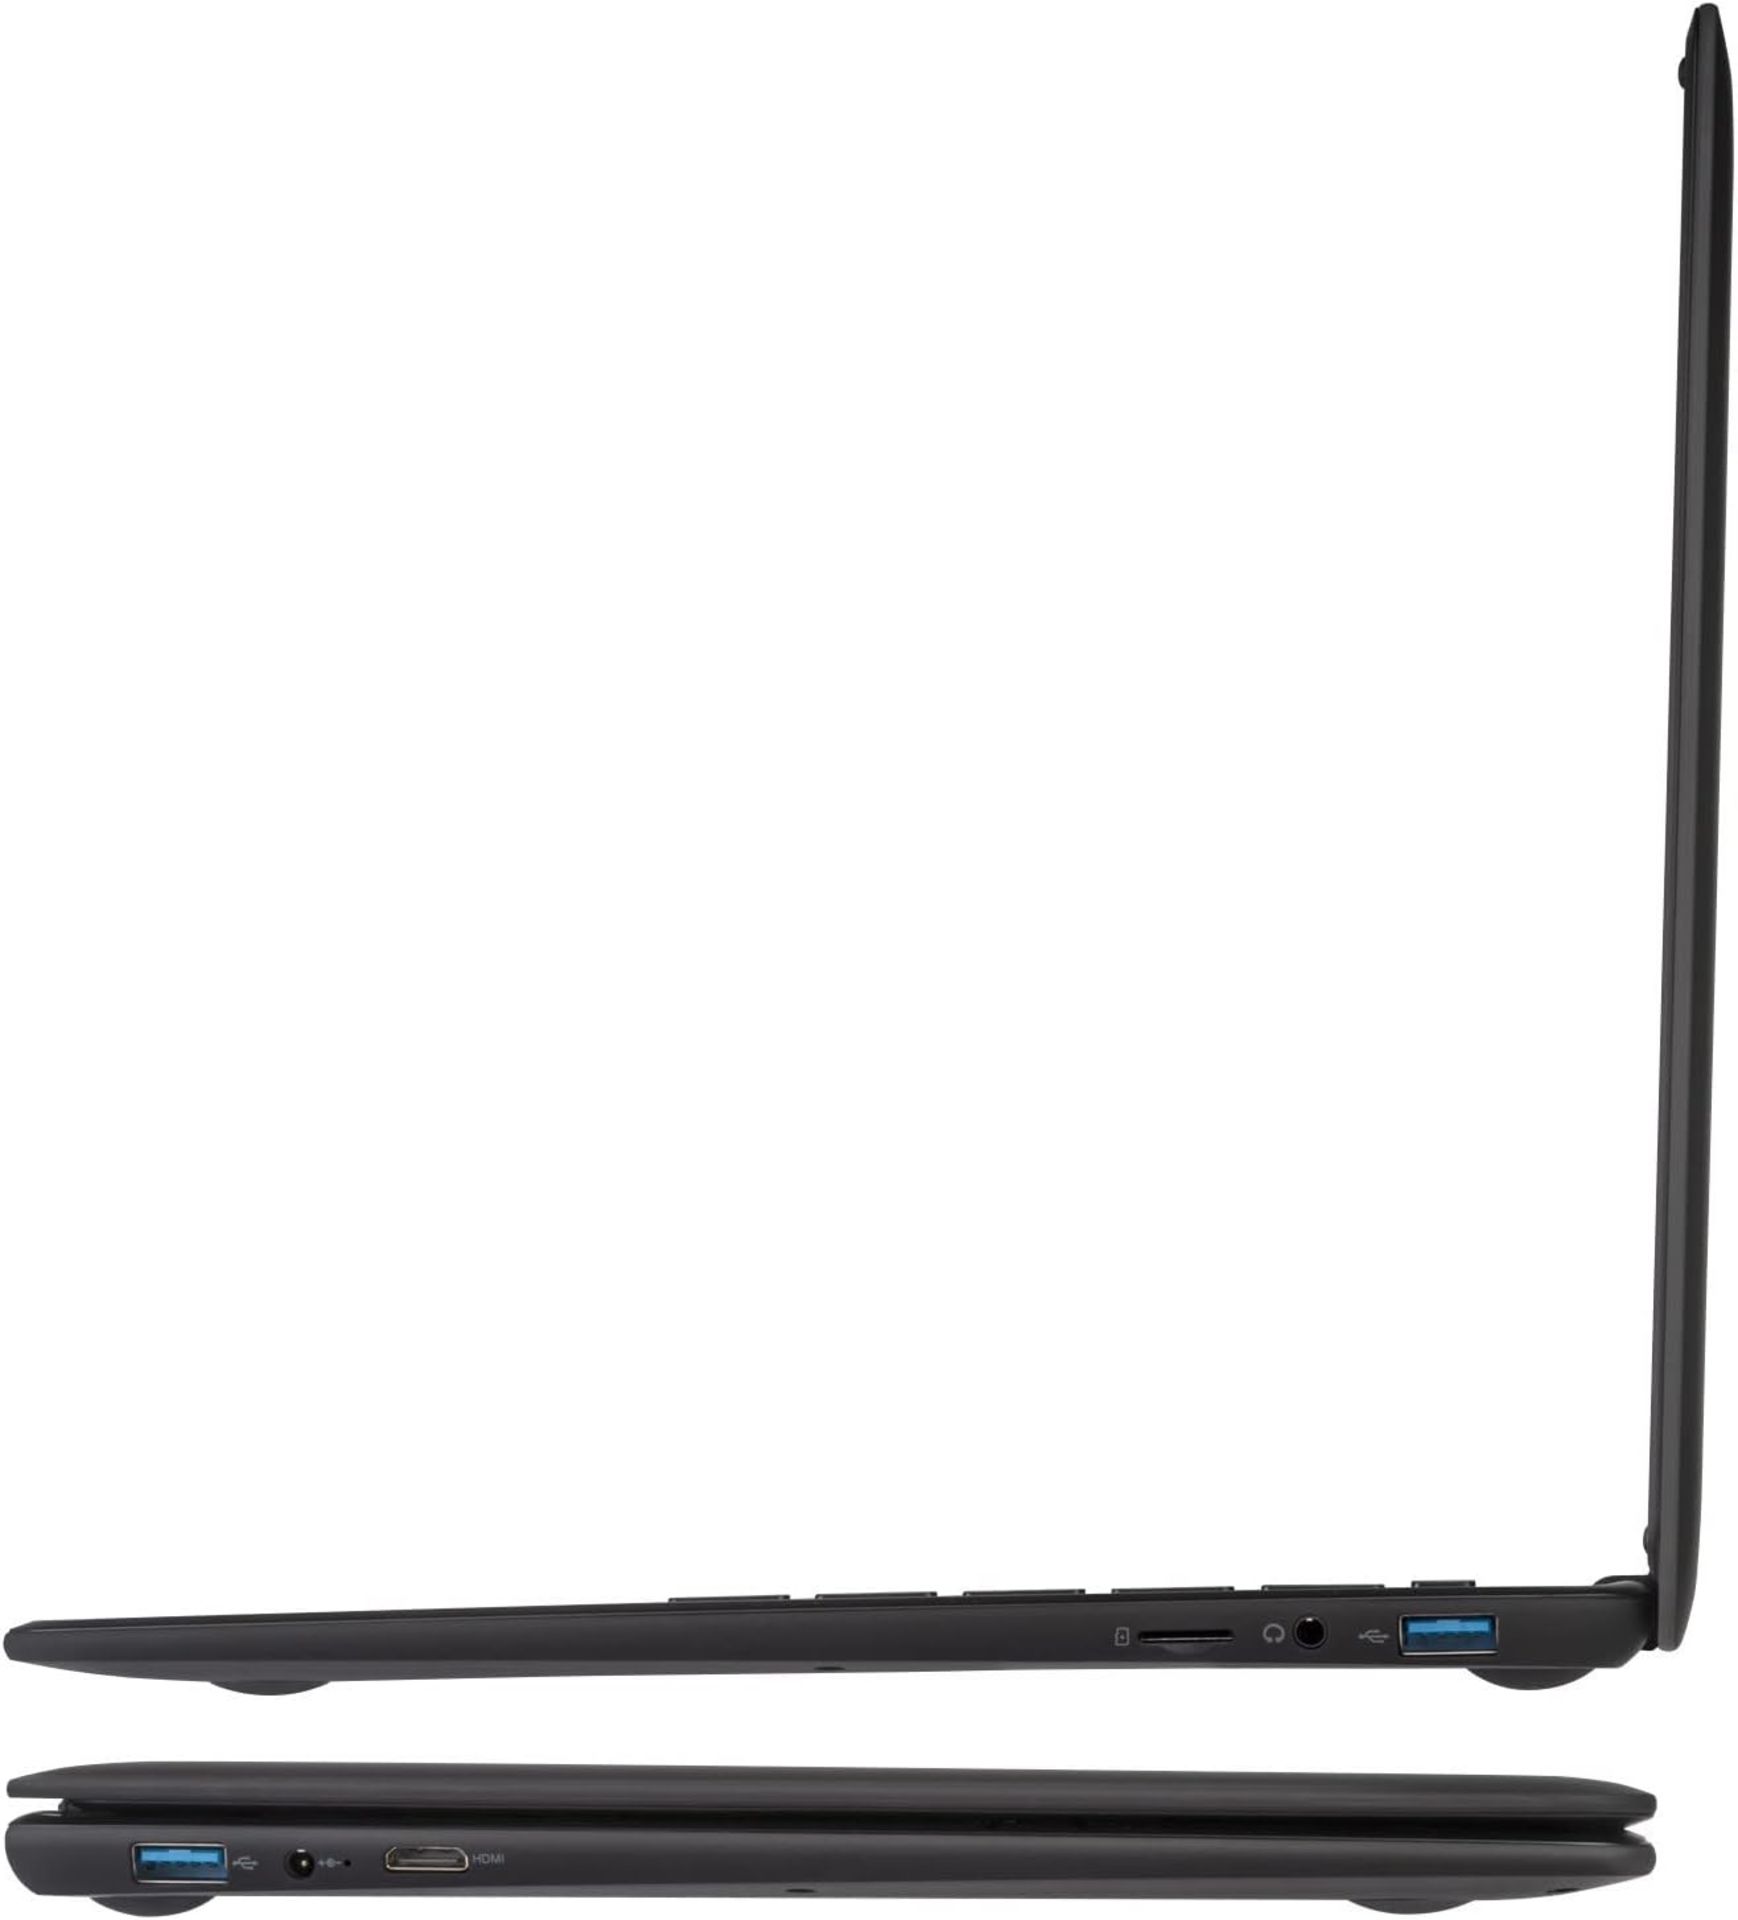 NEW & BOXED CODA 1.4 CODA043 14 Inch Laptop. RRP £199.99. (SR). Operating system Windows 10S, SSD - Image 3 of 7